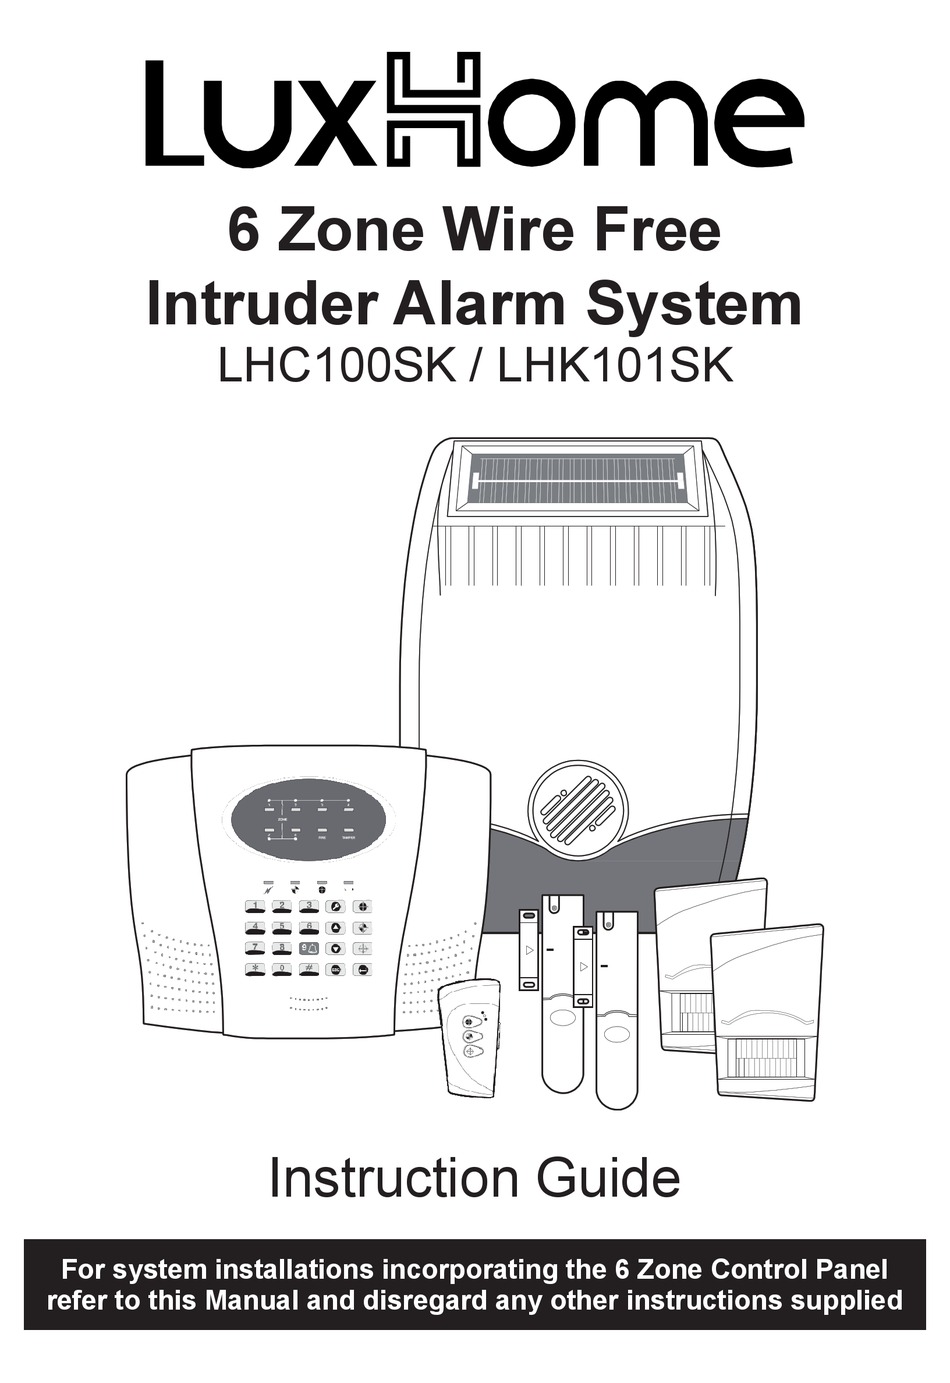 LUXHOME LHC100SK INSTRUCTION MANUAL Pdf Download |